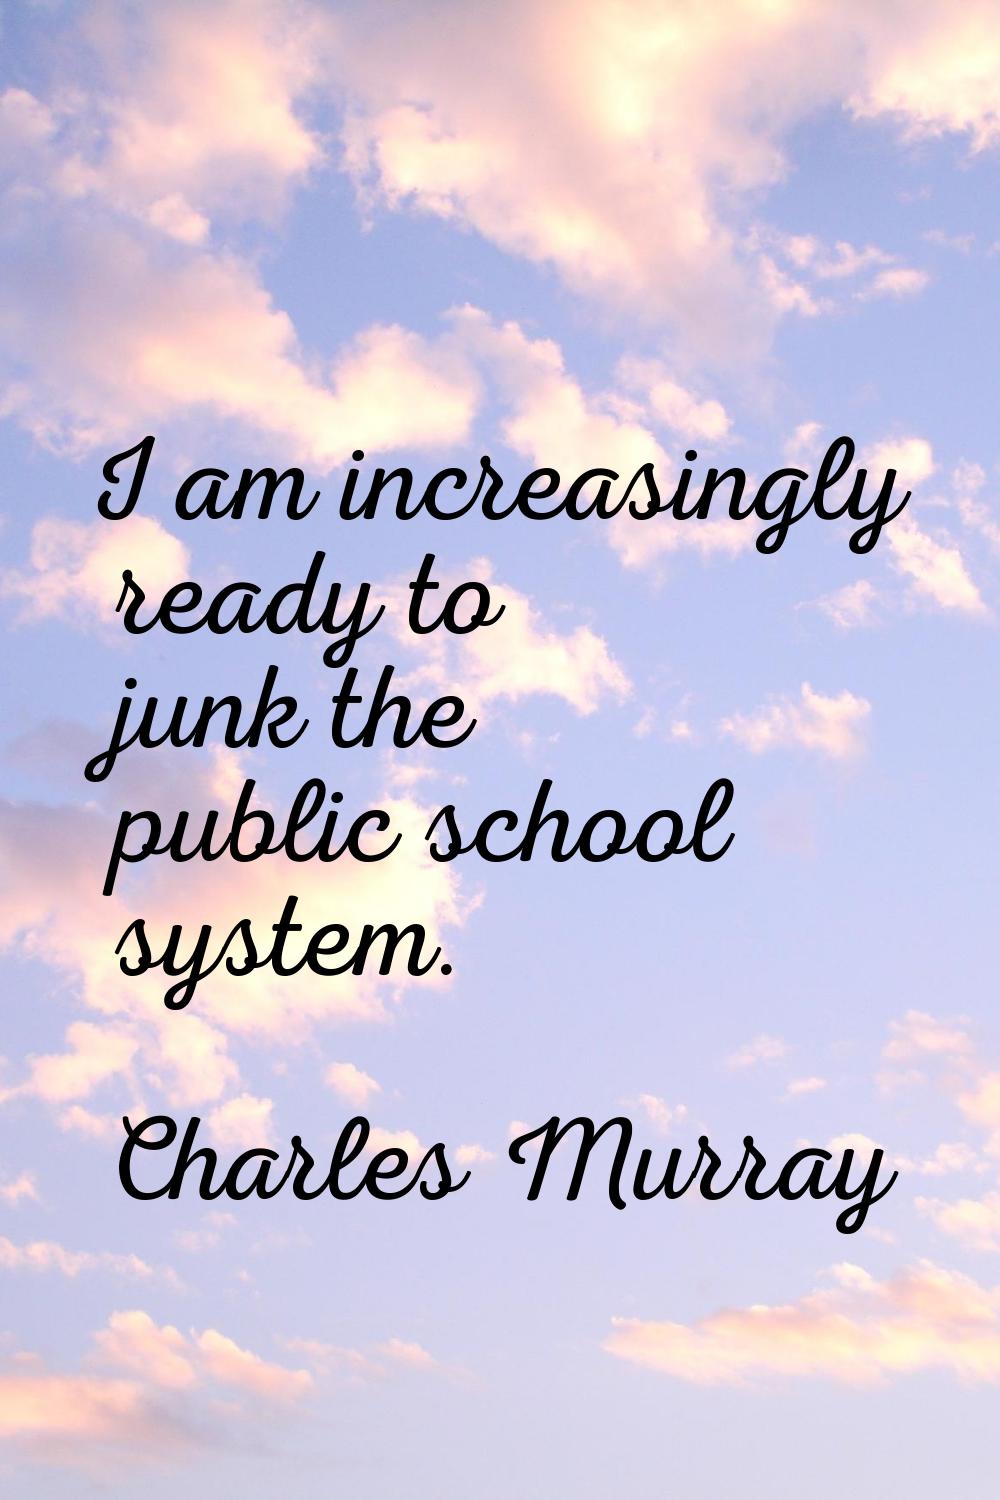 I am increasingly ready to junk the public school system.